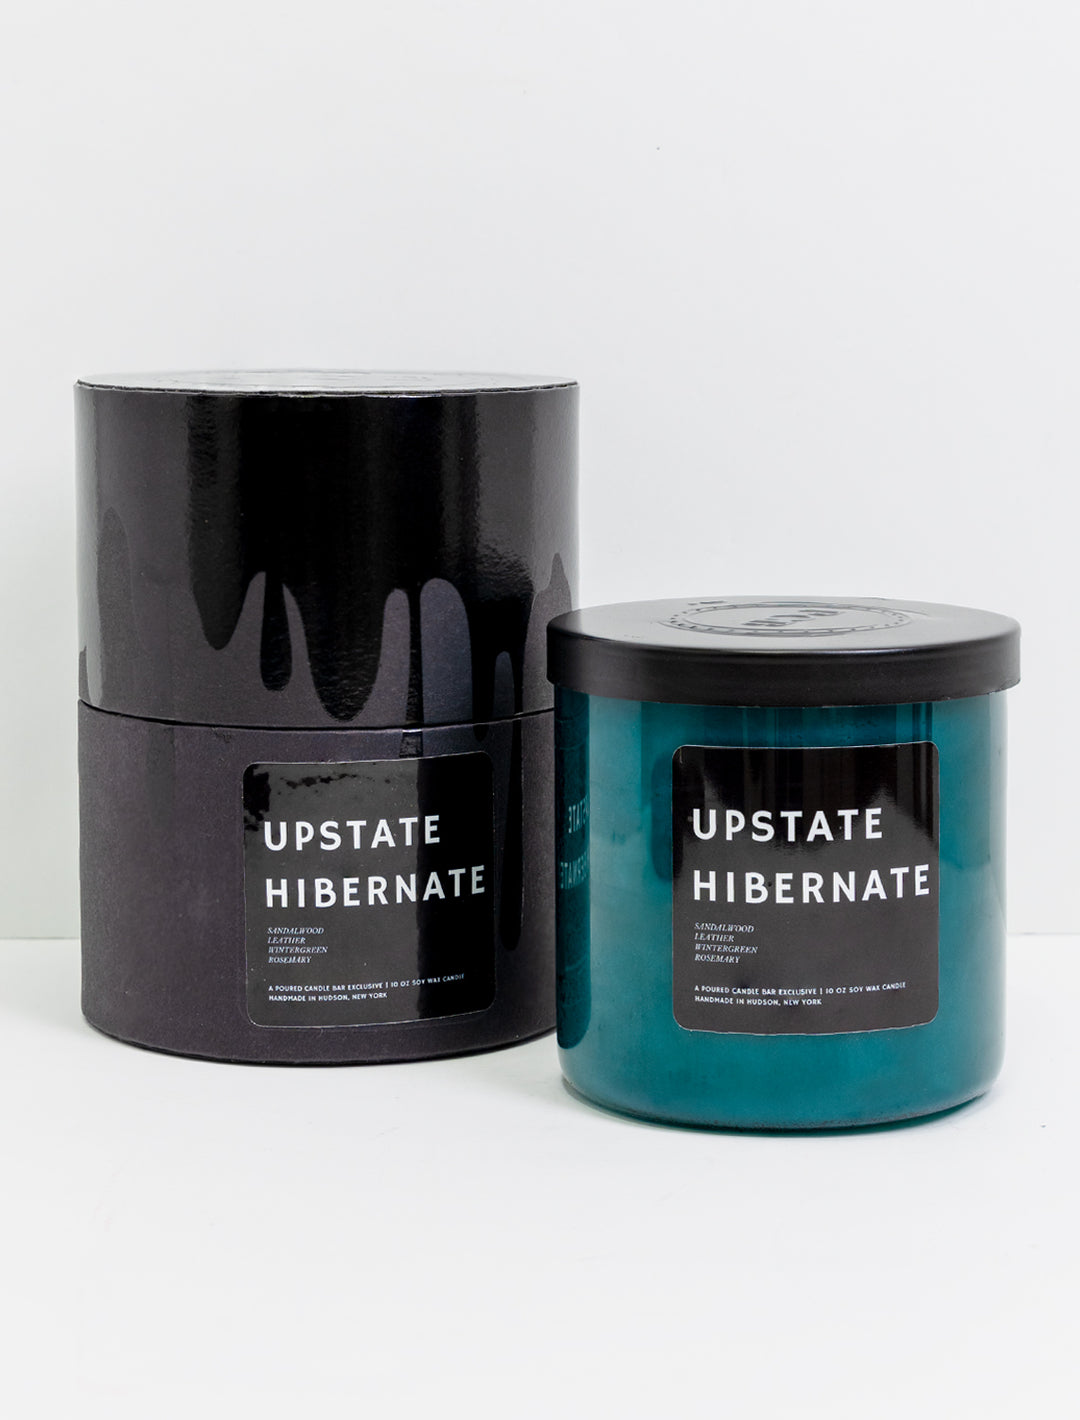 Poured Candle Bar's upstate hibernate candle and packaging.